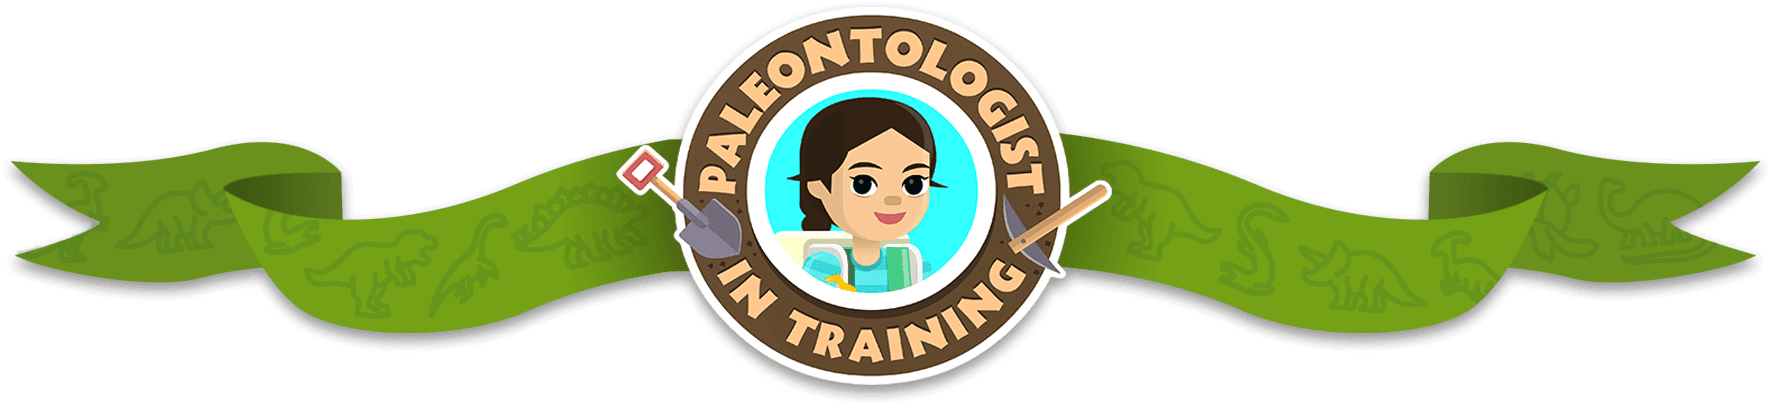 Dana, a young paleontologist in training, takes on the unfinished dinosaur experiments from the dino field guide book given to her by trek. Dino Dana The Movie Paleontologist In Training Program